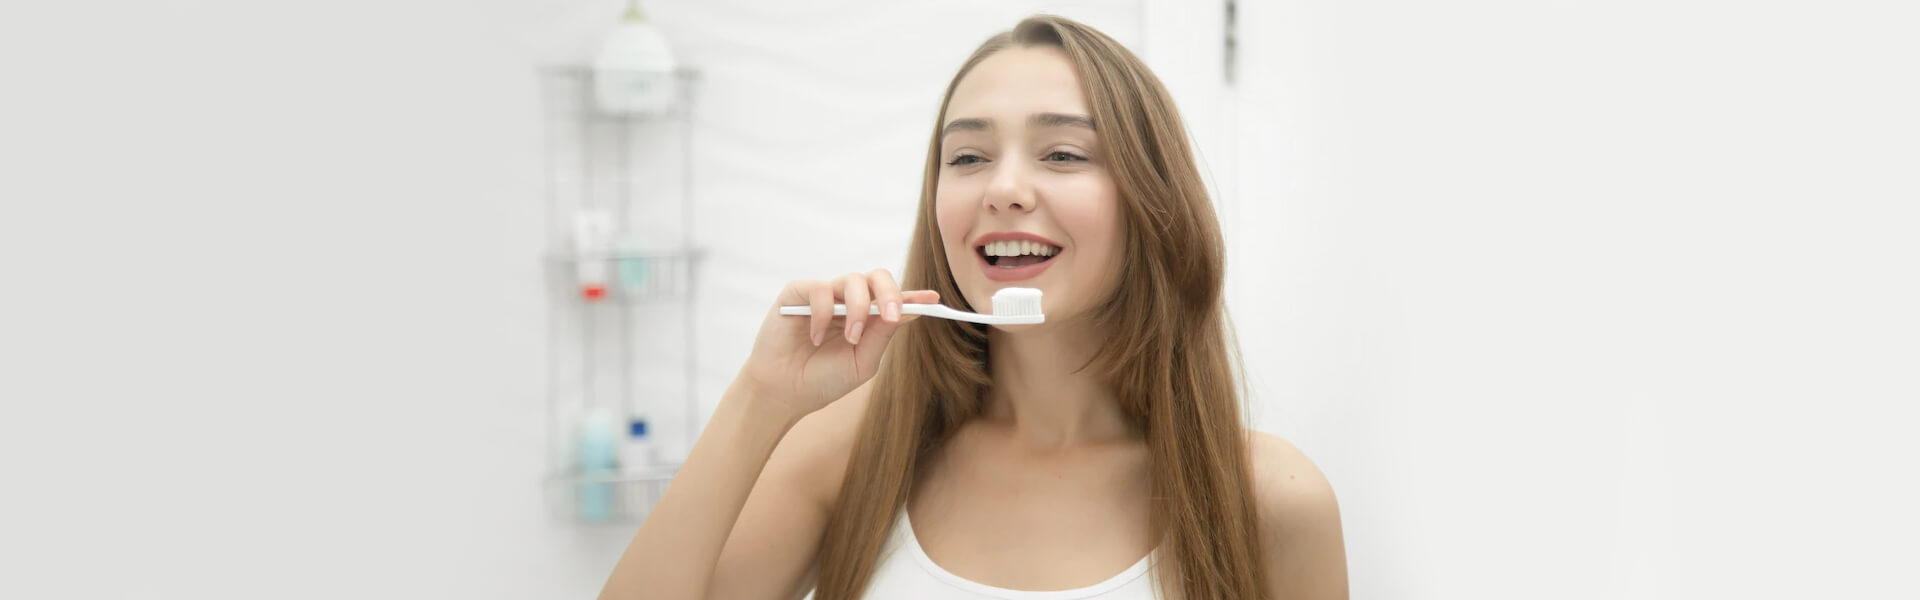 Which Is the Best Toothbrush & Toothpaste for Healthy Teeth?